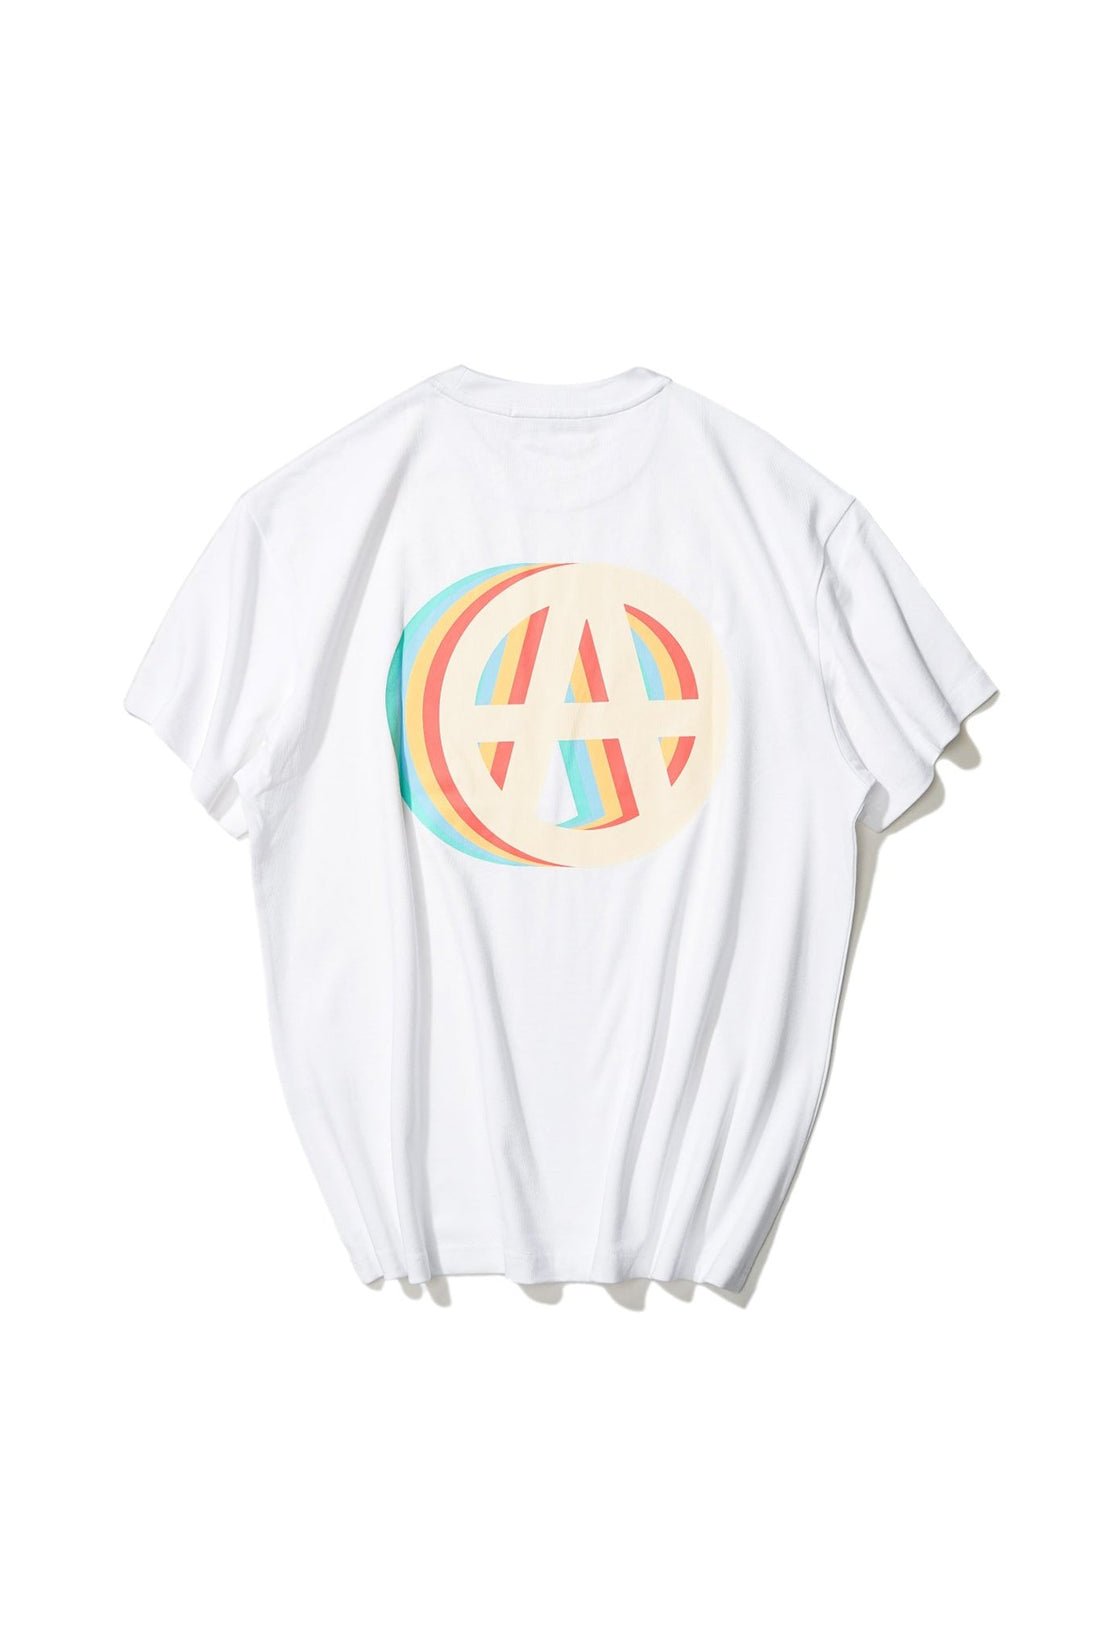 CIRCLE A T-SHIRT WHITE Acupuncture